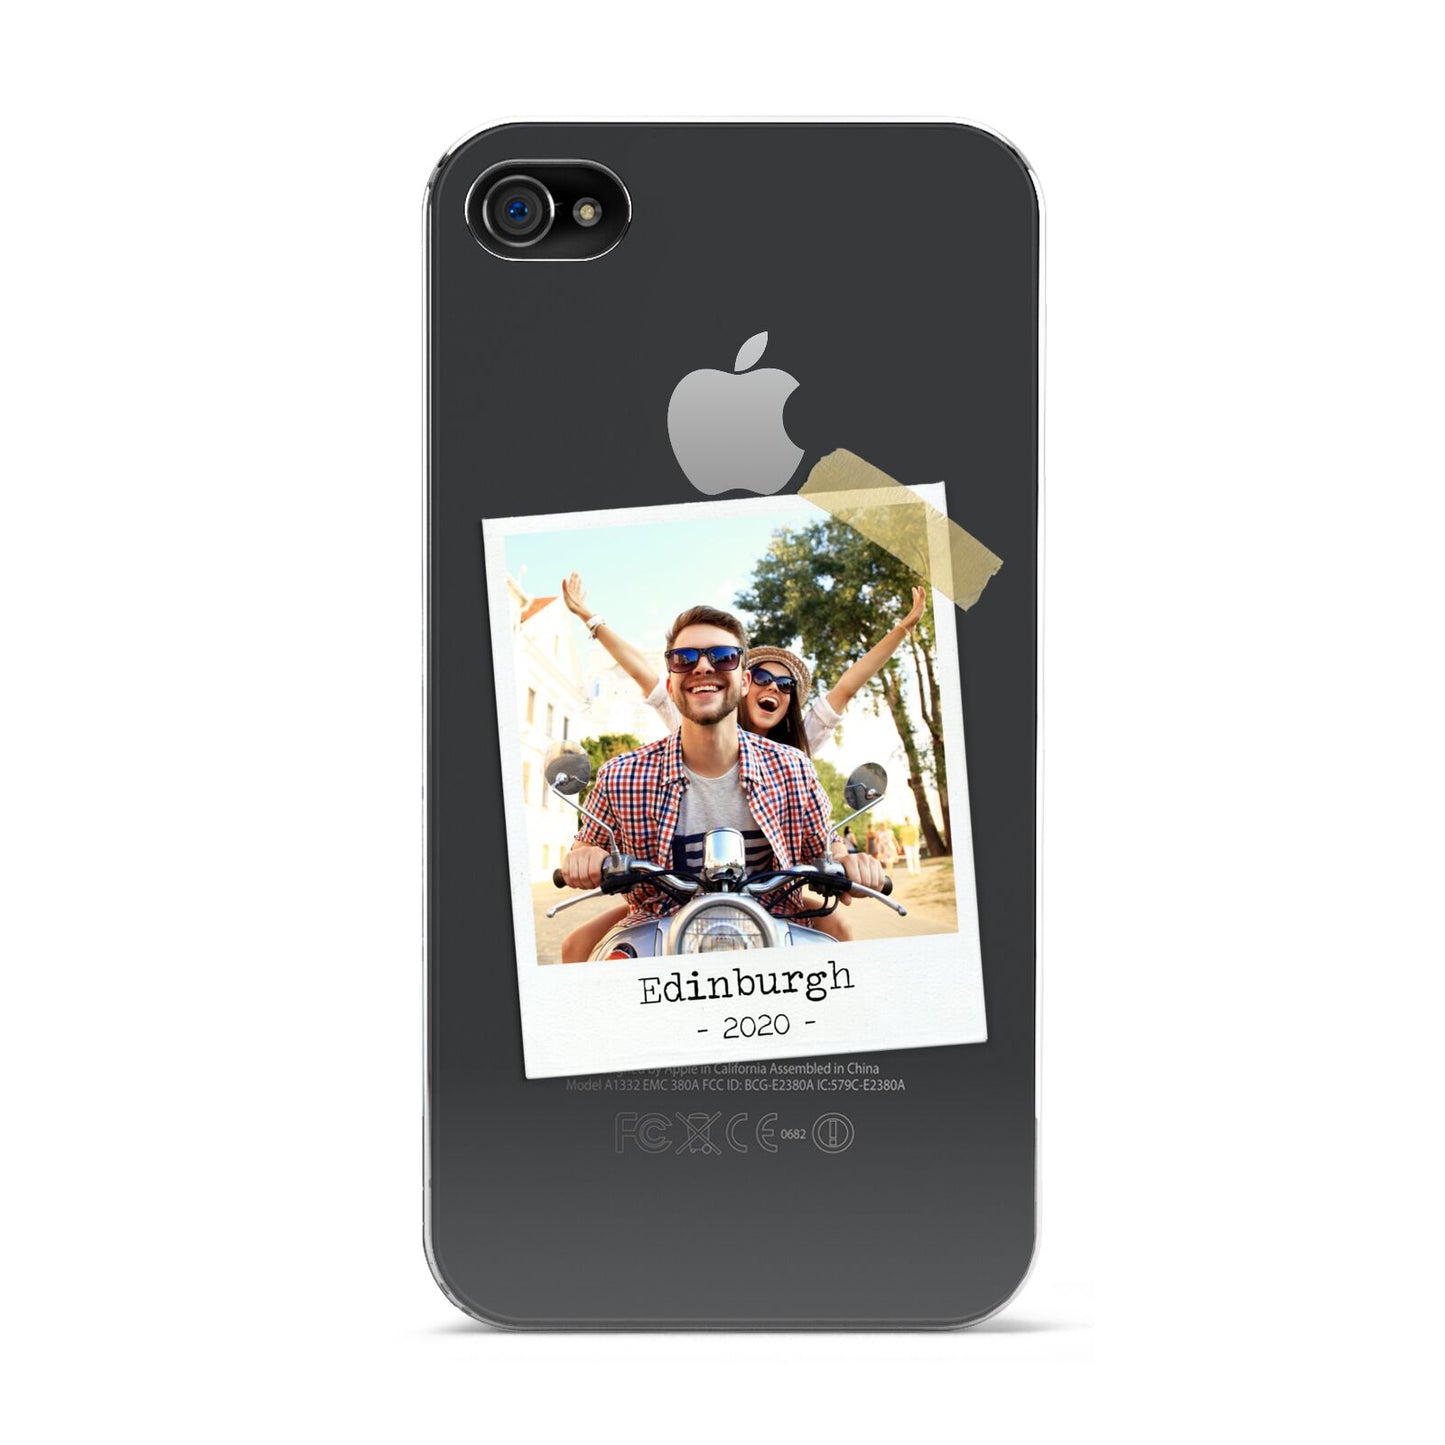 Taped Holiday Snap Photo Upload Apple iPhone 4s Case